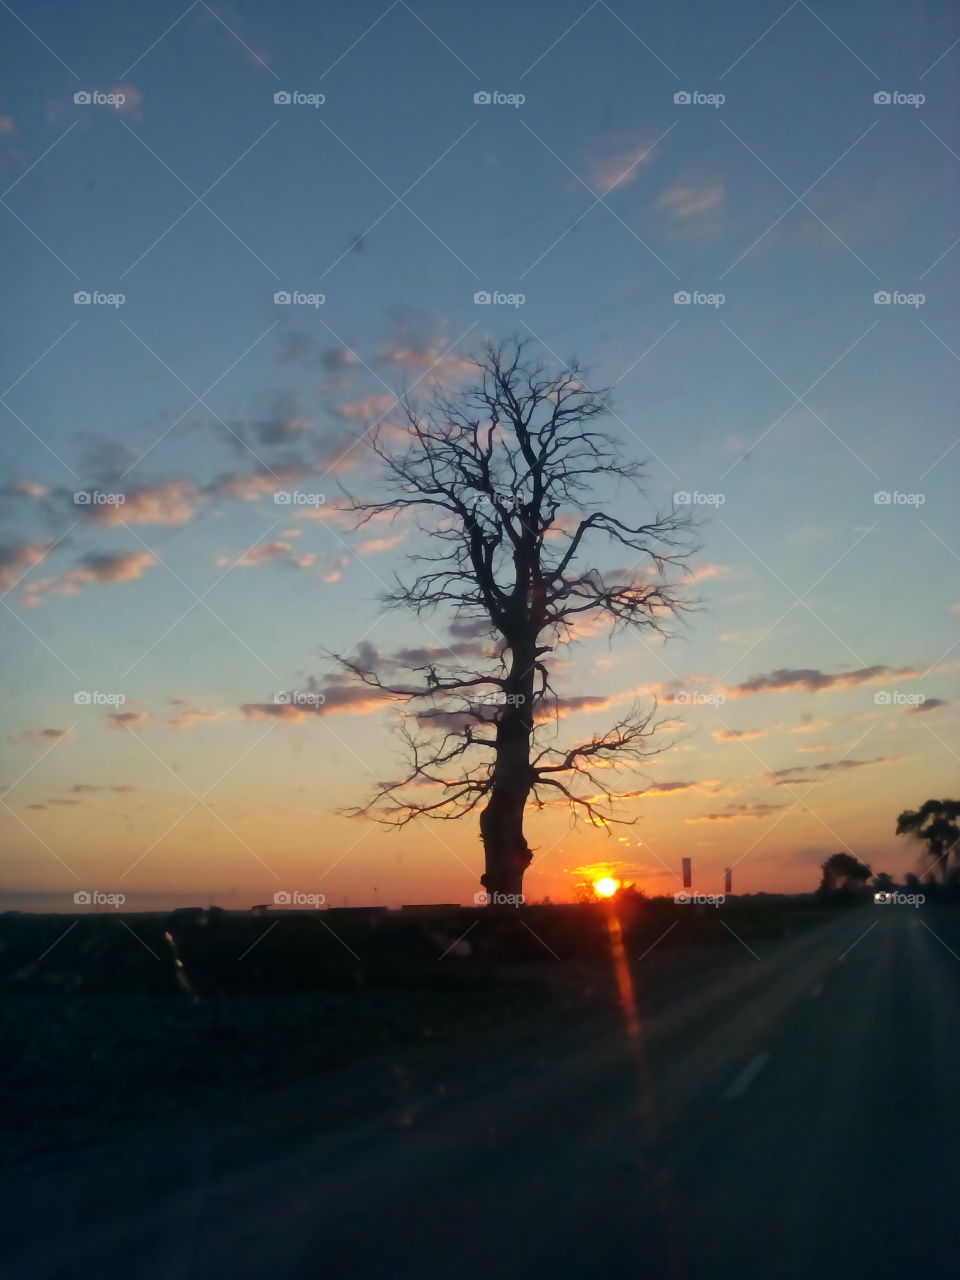 Sunrise. On the road, my favourite tree and the sunrise.